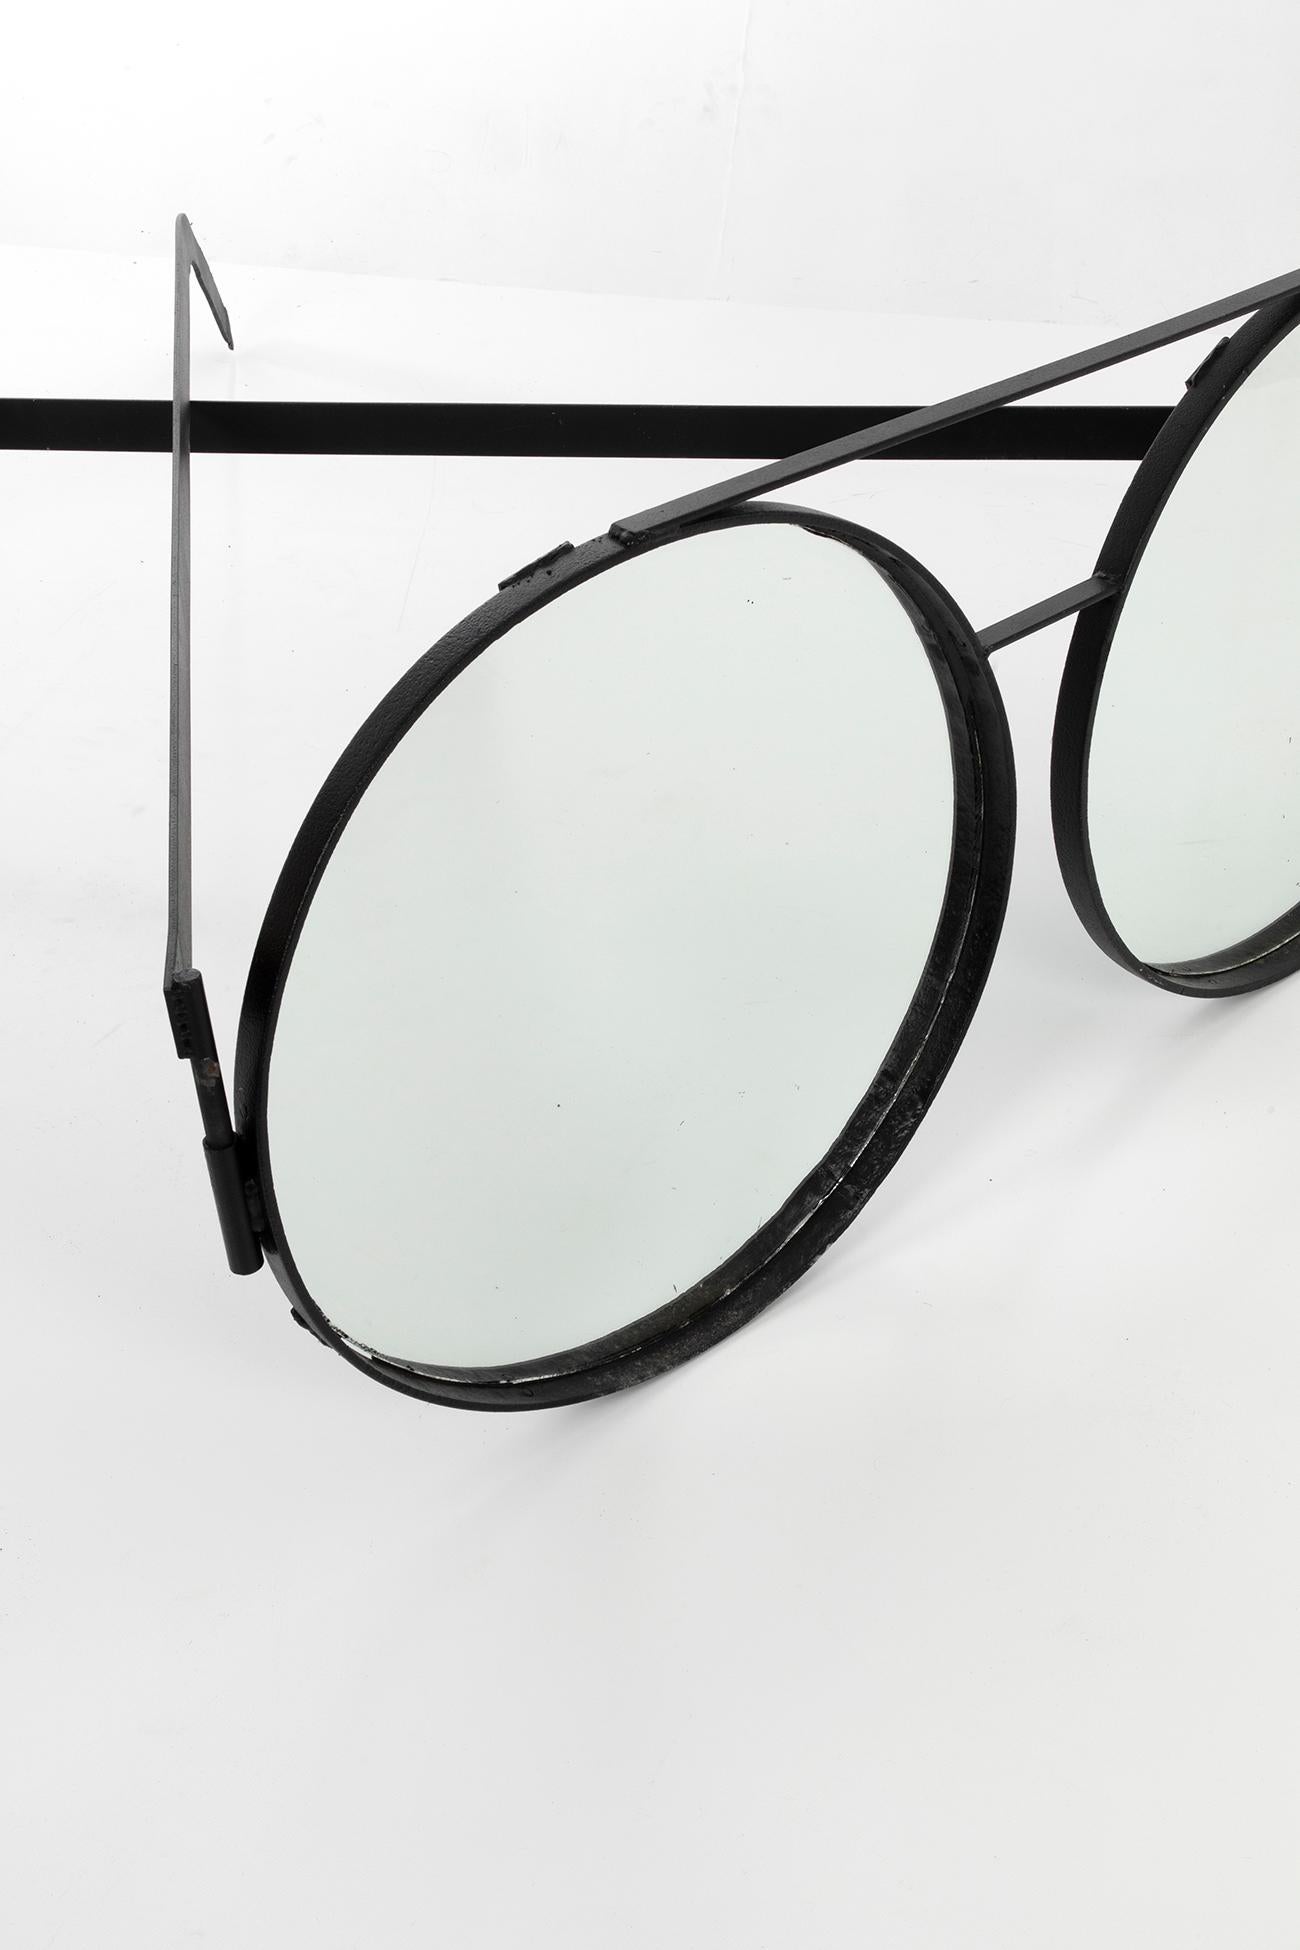 Pair of Handcrafted Oversized Glasses 1